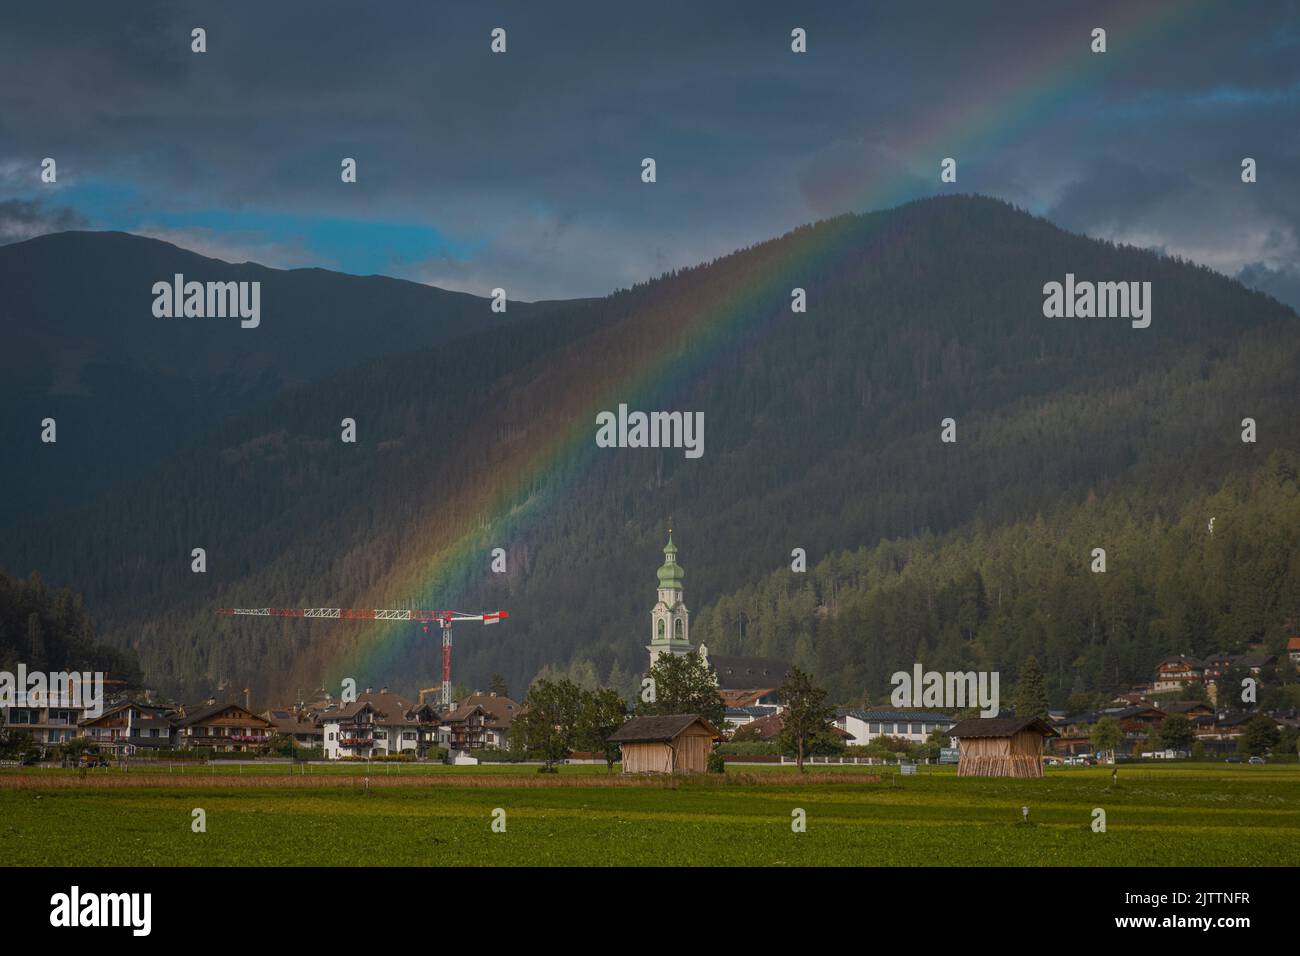 Beautiful rainbow rising above the houses and church in Toblach or Dobbiaco, a small town in austrian part of northern italy. Stock Photo